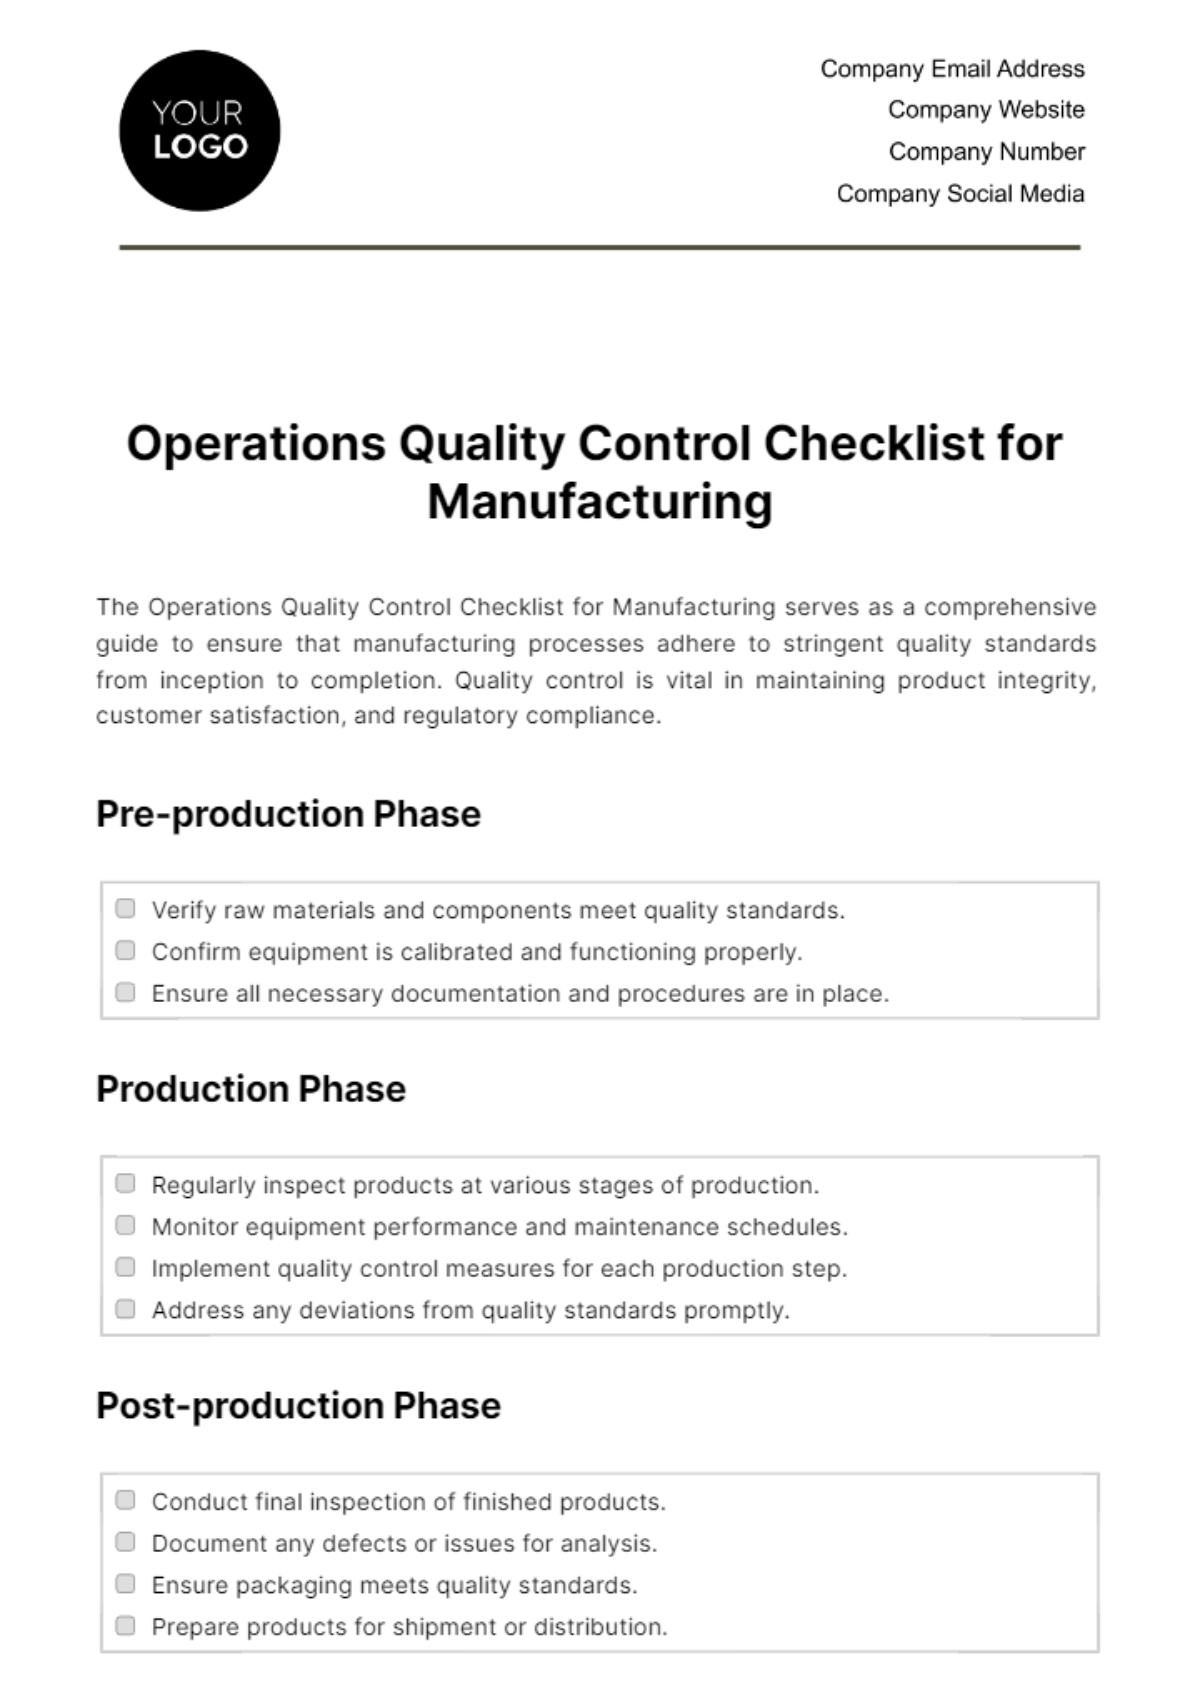 Operations Quality Control Checklist for Manufacturing Template